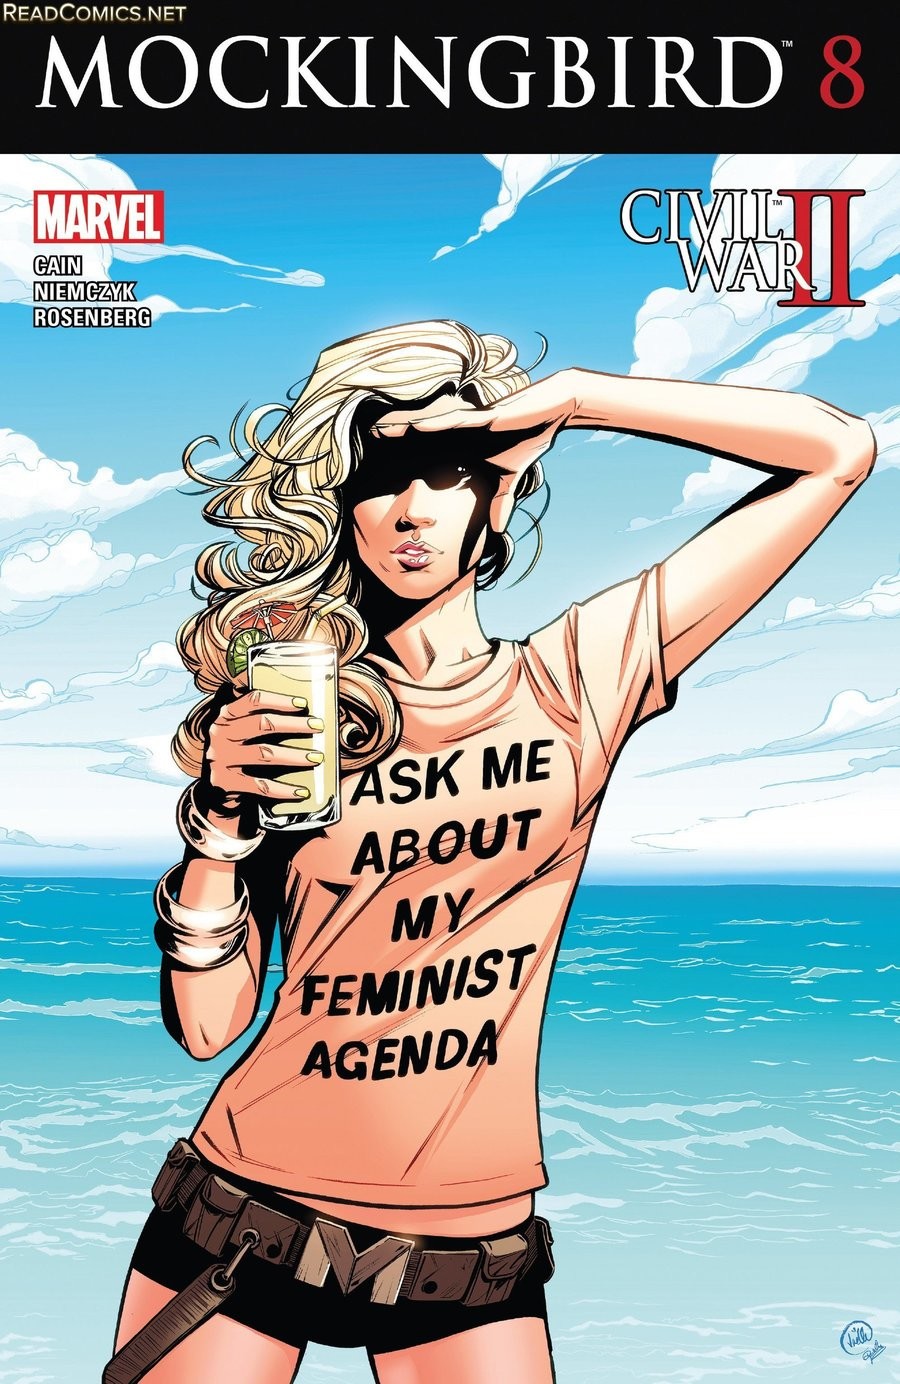 Mockingbird was cancelled. Gee,I wonder why. Chelsea Cain Q ) so Follow Mockingbird is cancelled. But we need to make sure @Marvel makes room for more titles by